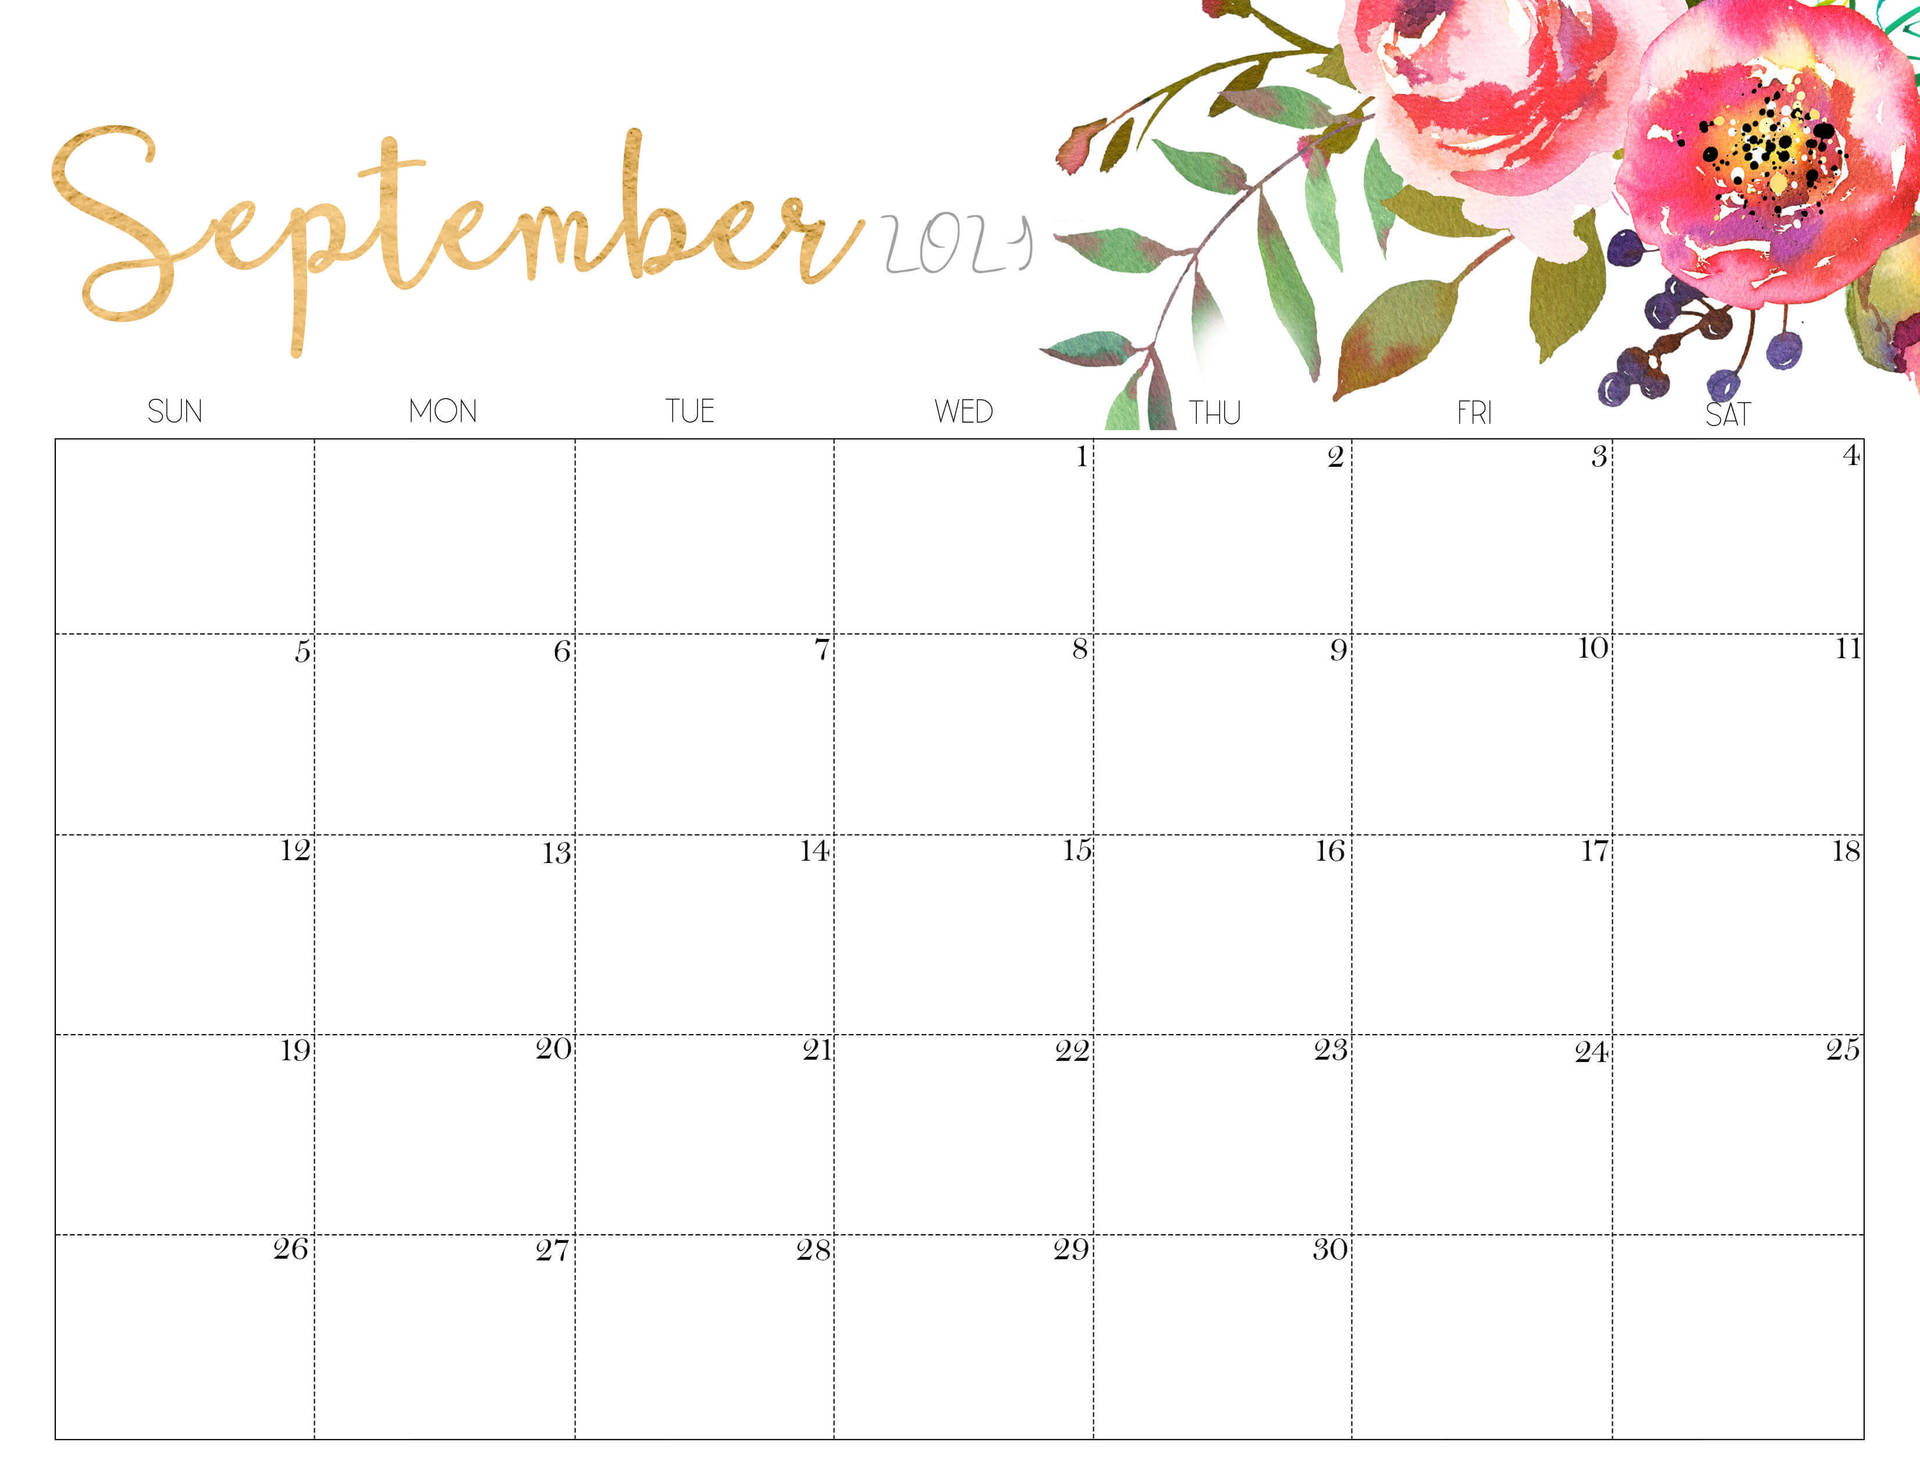 "Enjoy the start of autumn with September's pink flowers" Wallpaper